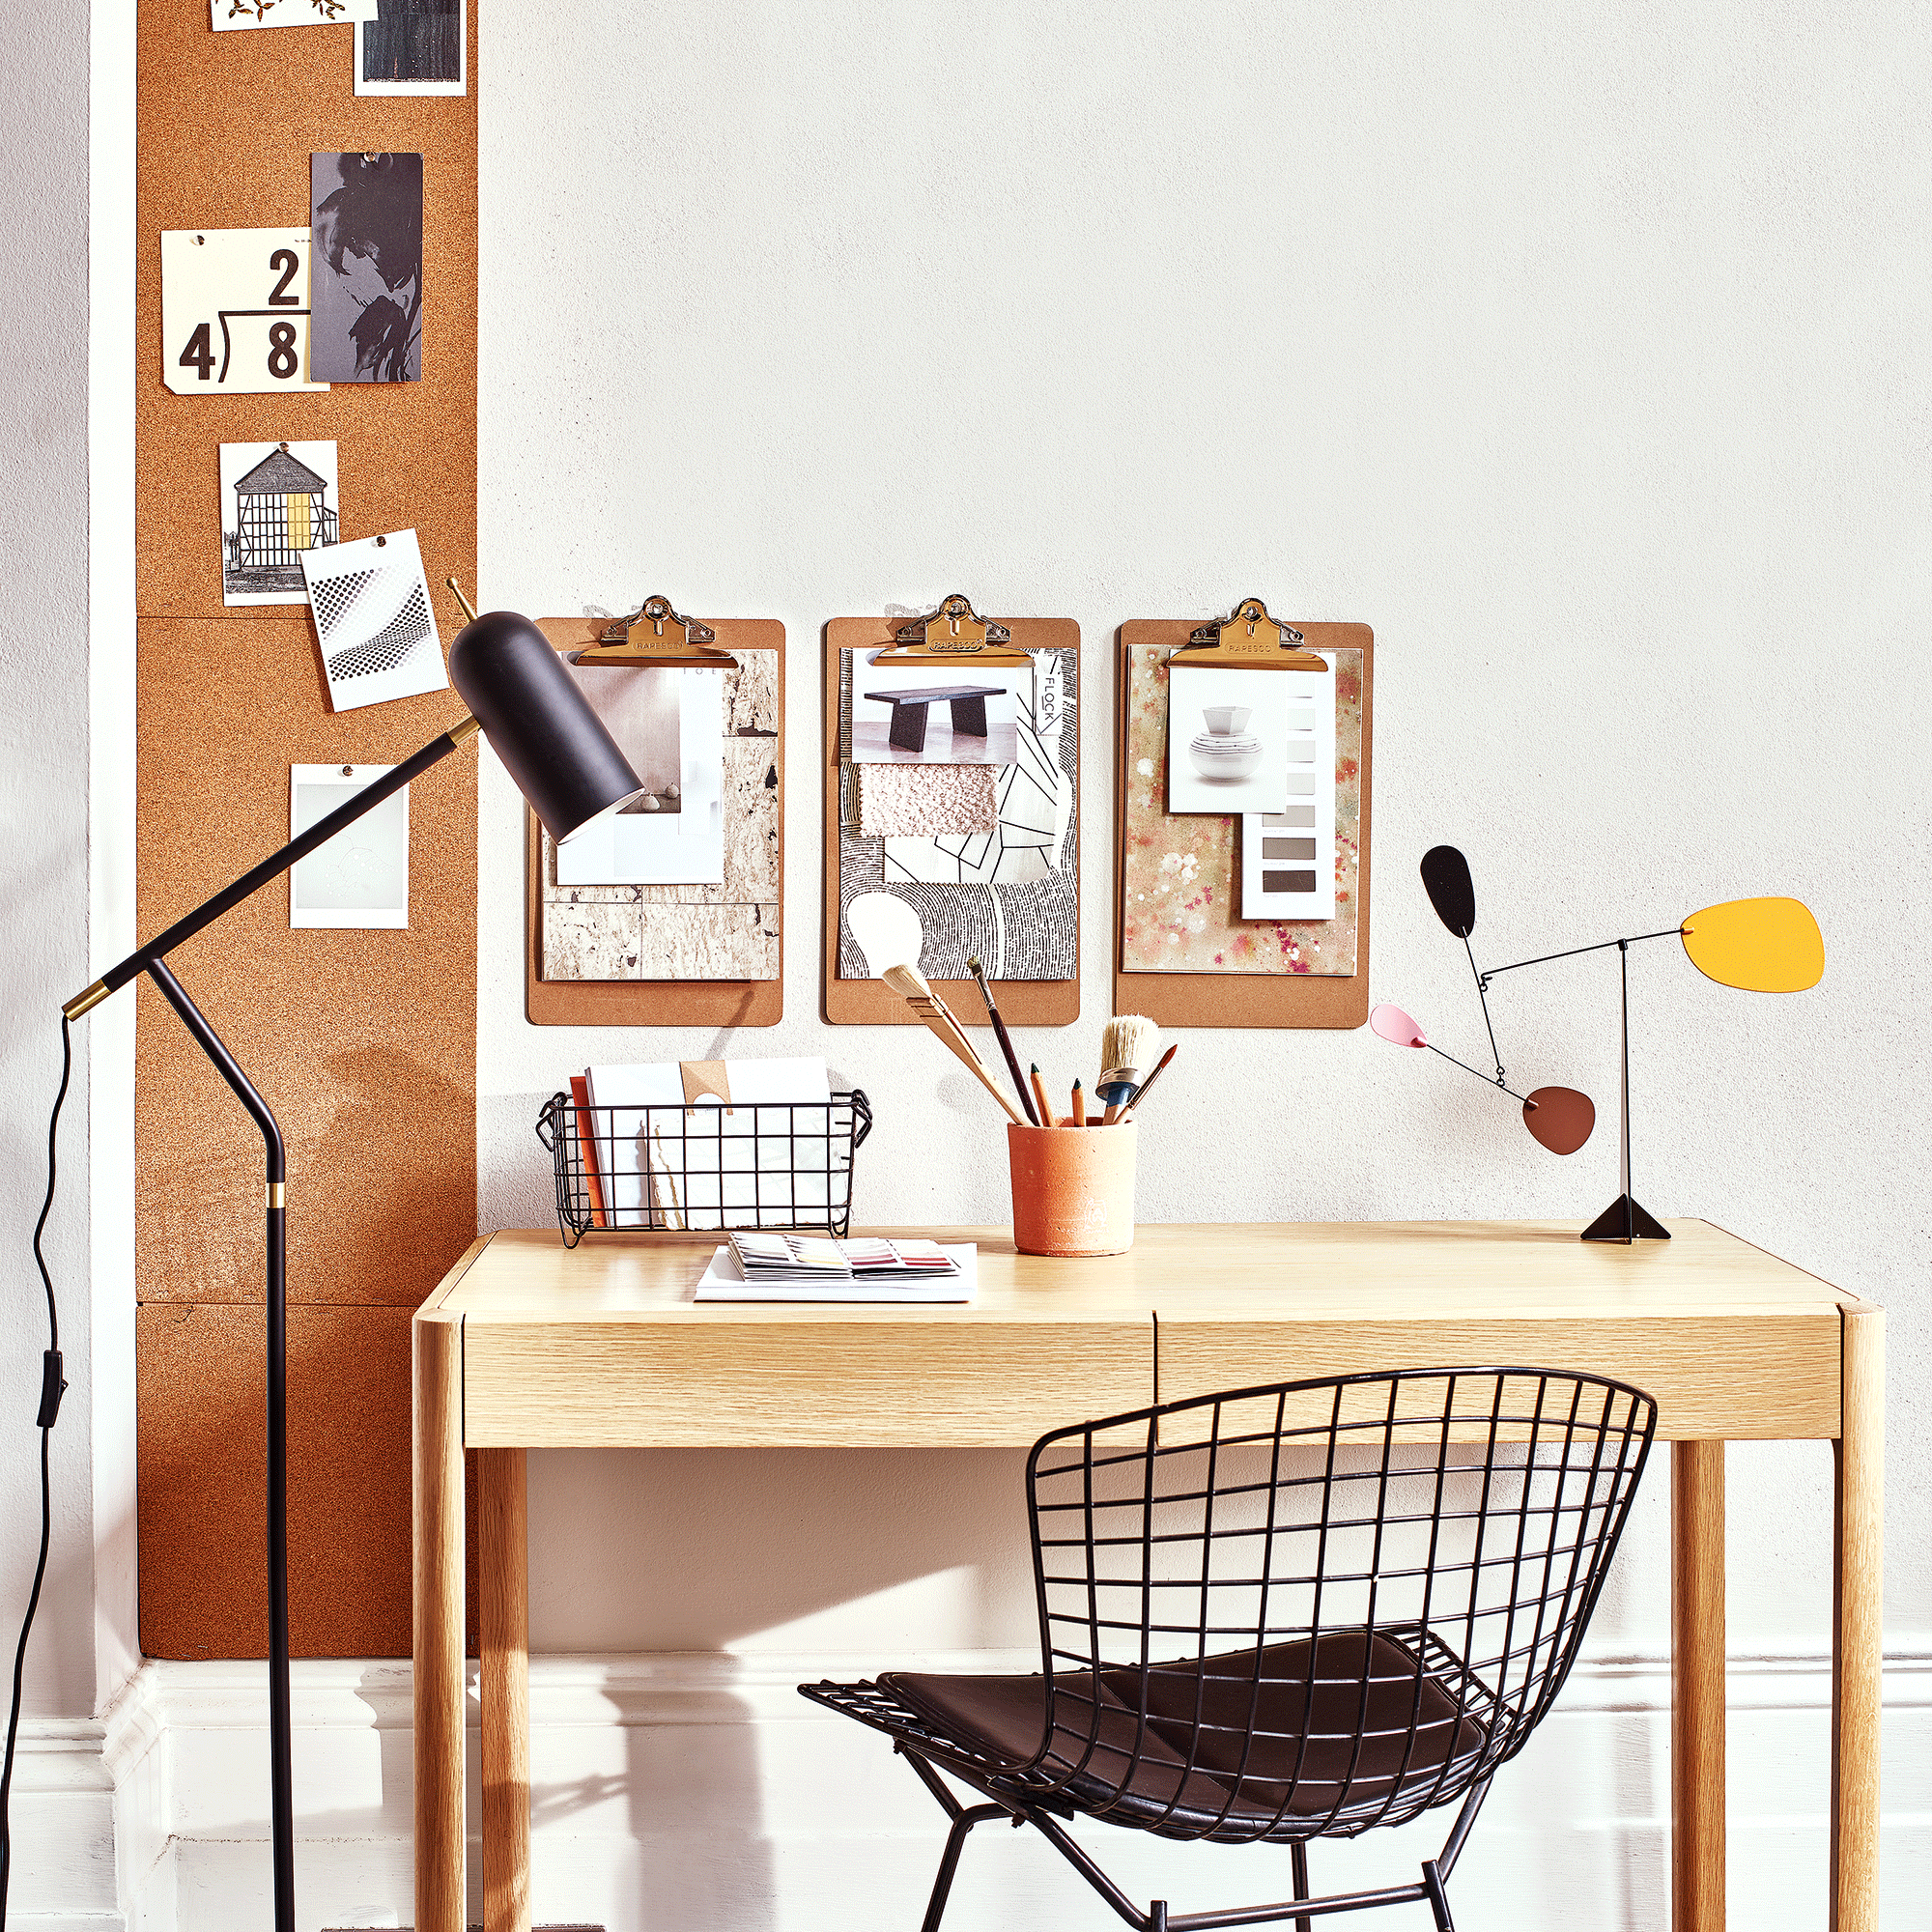 Small wooden desk with corkboard